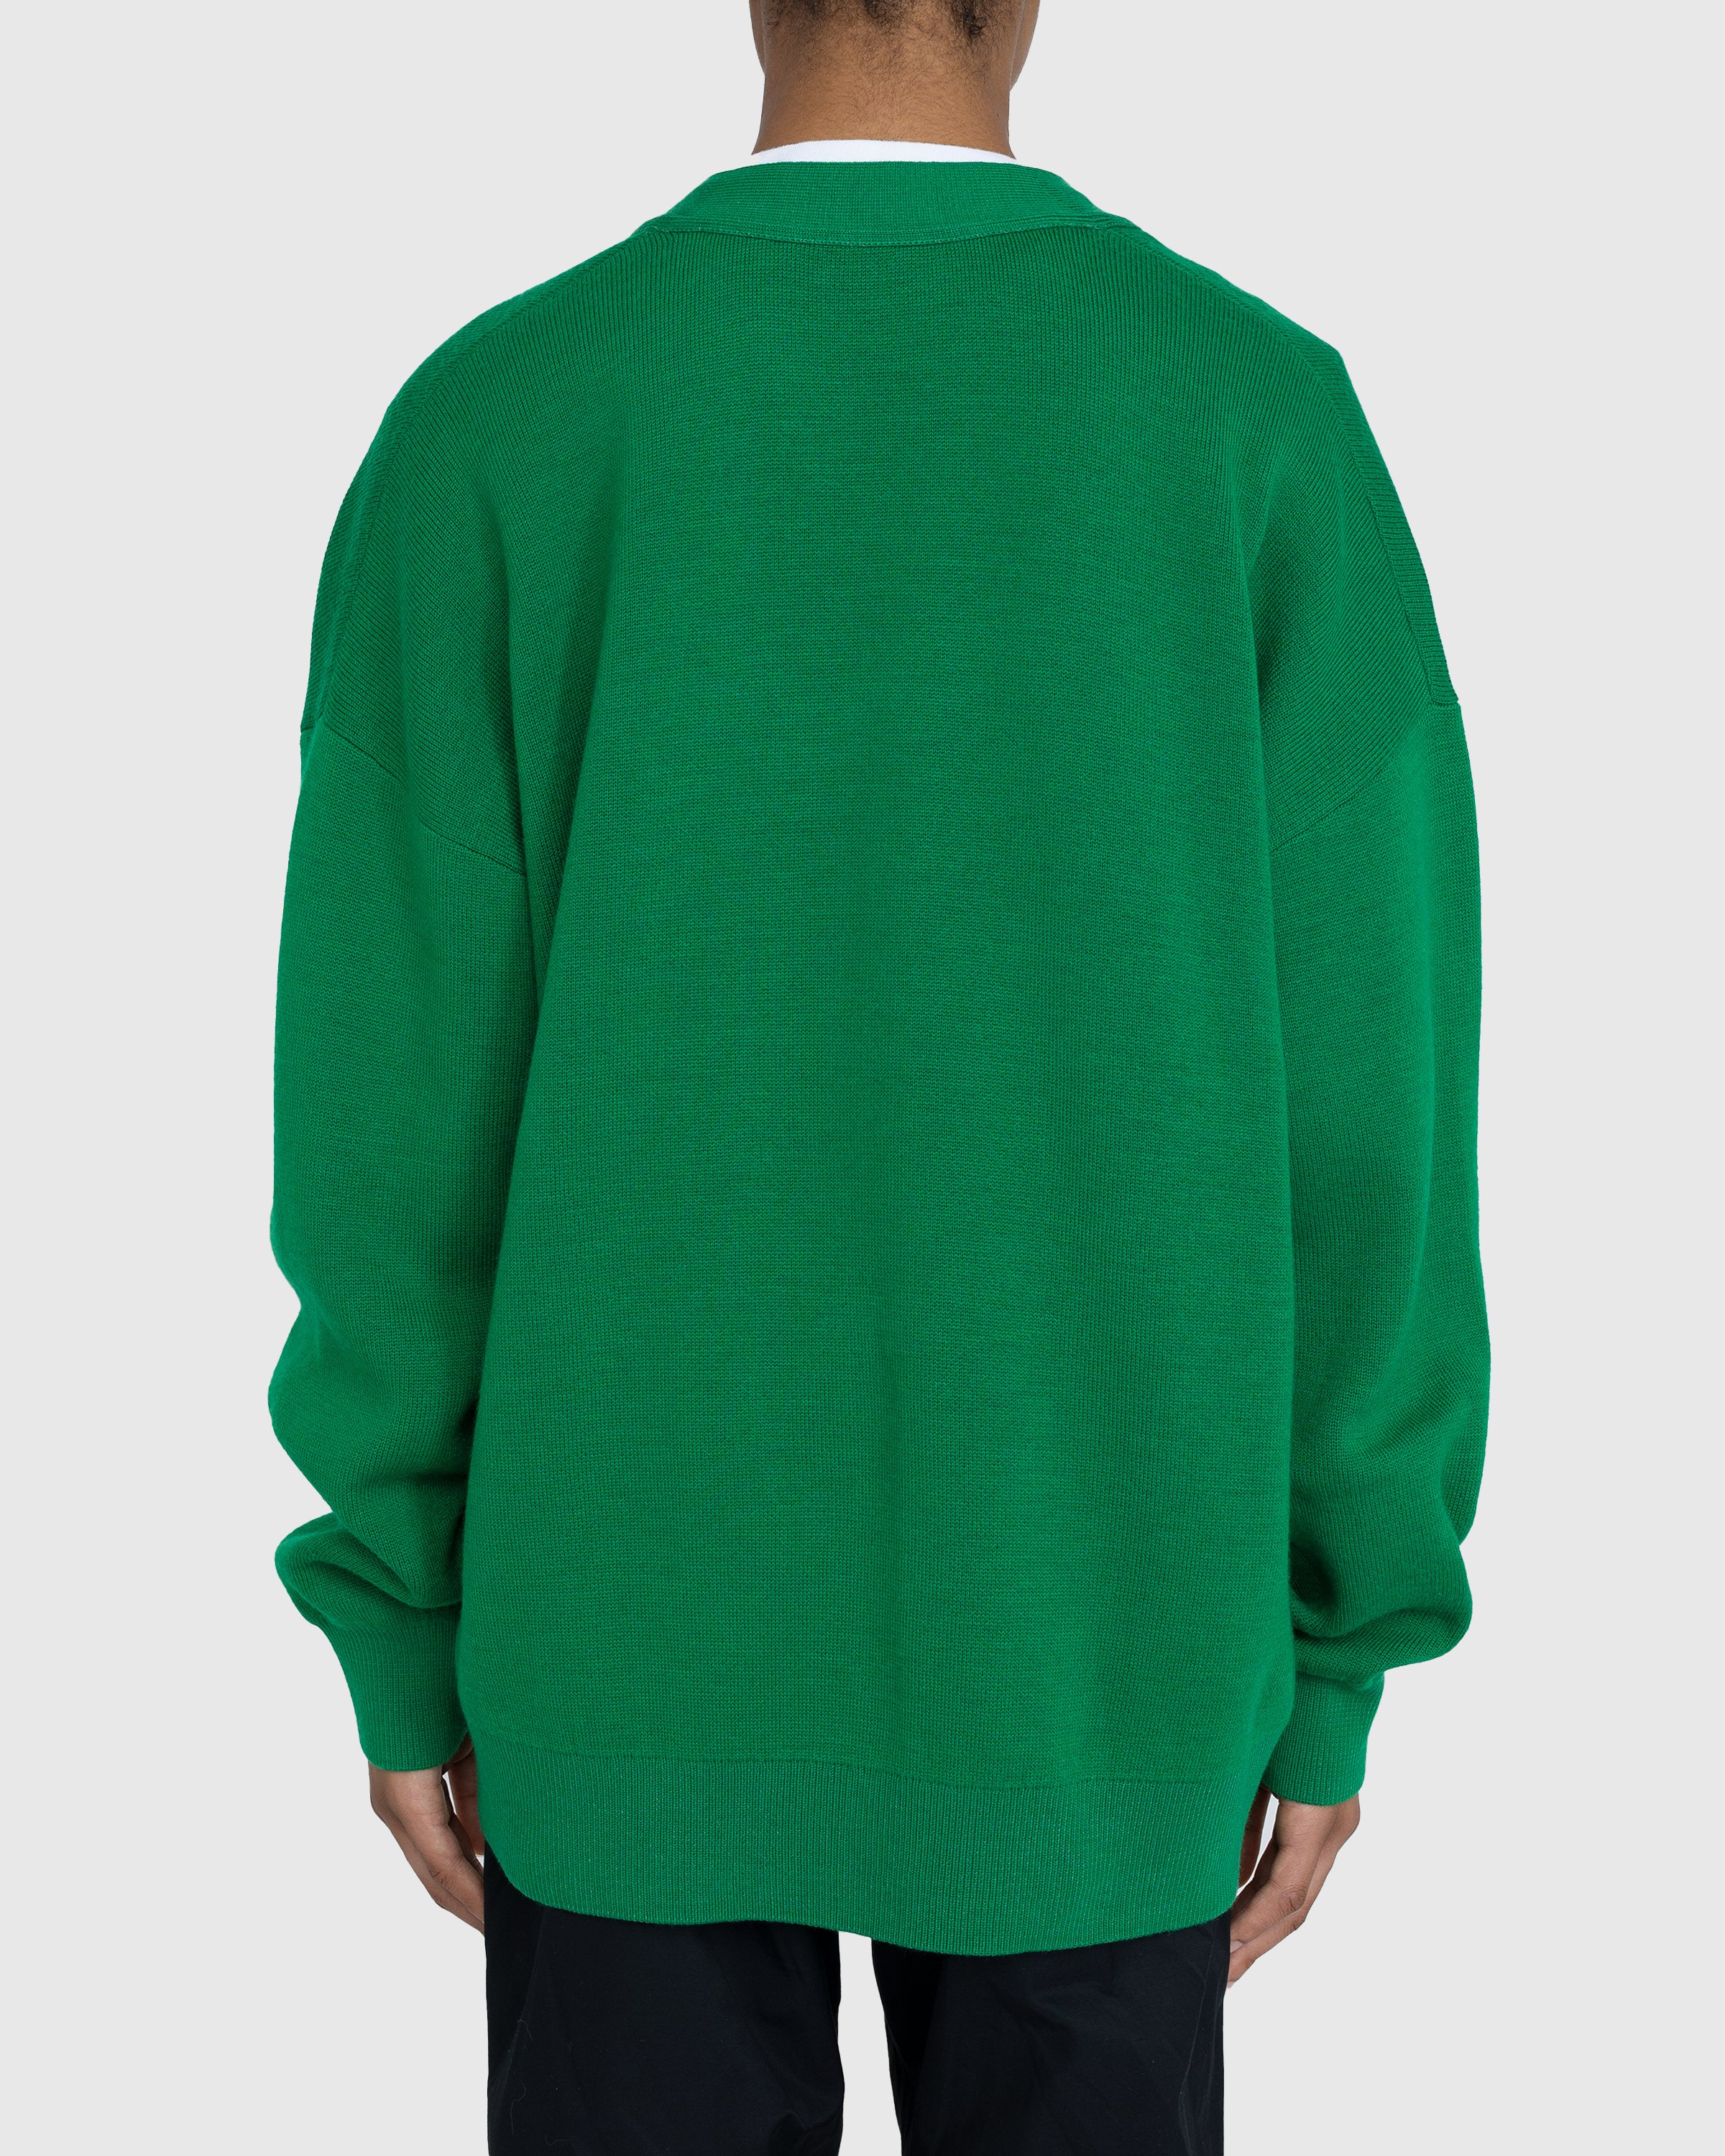 Acne Studios - Wool Blend V-Neck Cardigan Sweater Electric Green - Clothing - Green - Image 4